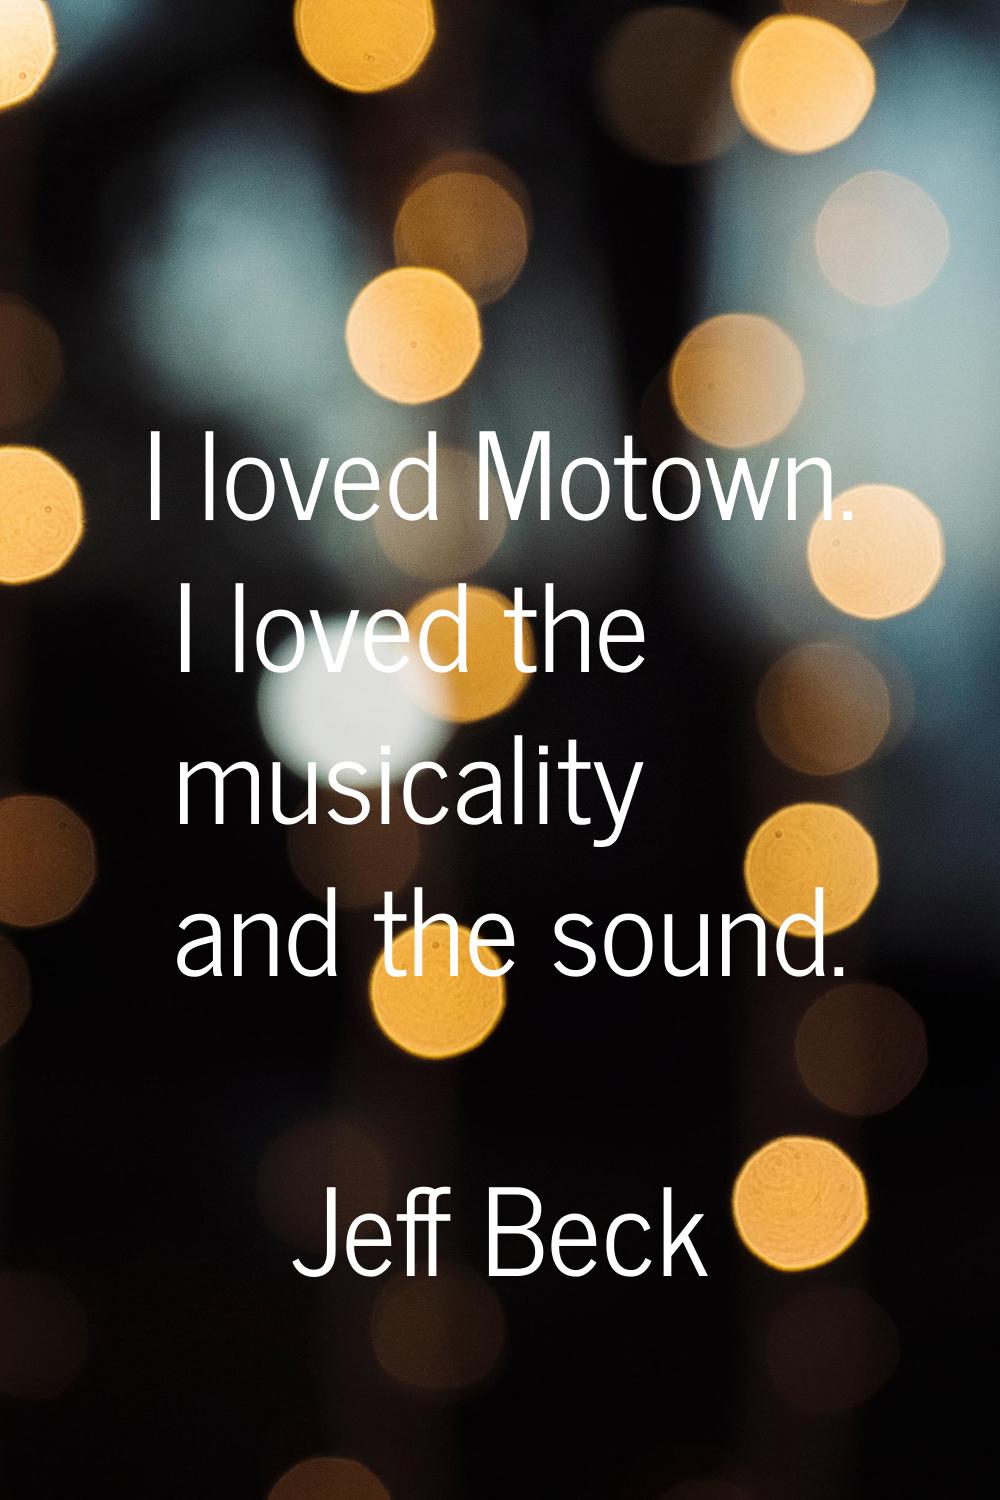 I loved Motown. I loved the musicality and the sound.